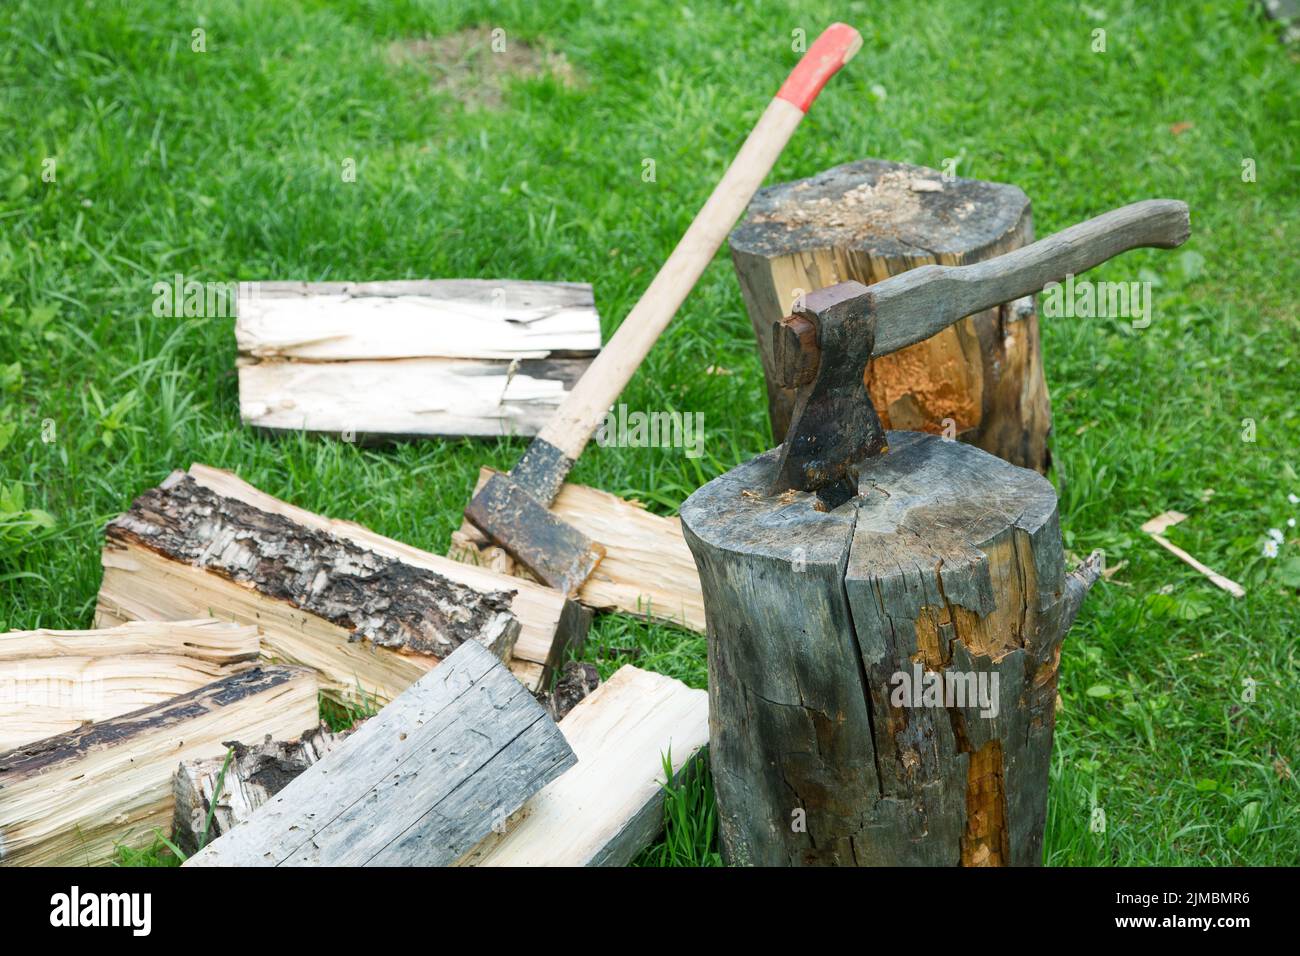 Ax and cleaver on chopped firewood on a summer day Stock Photo